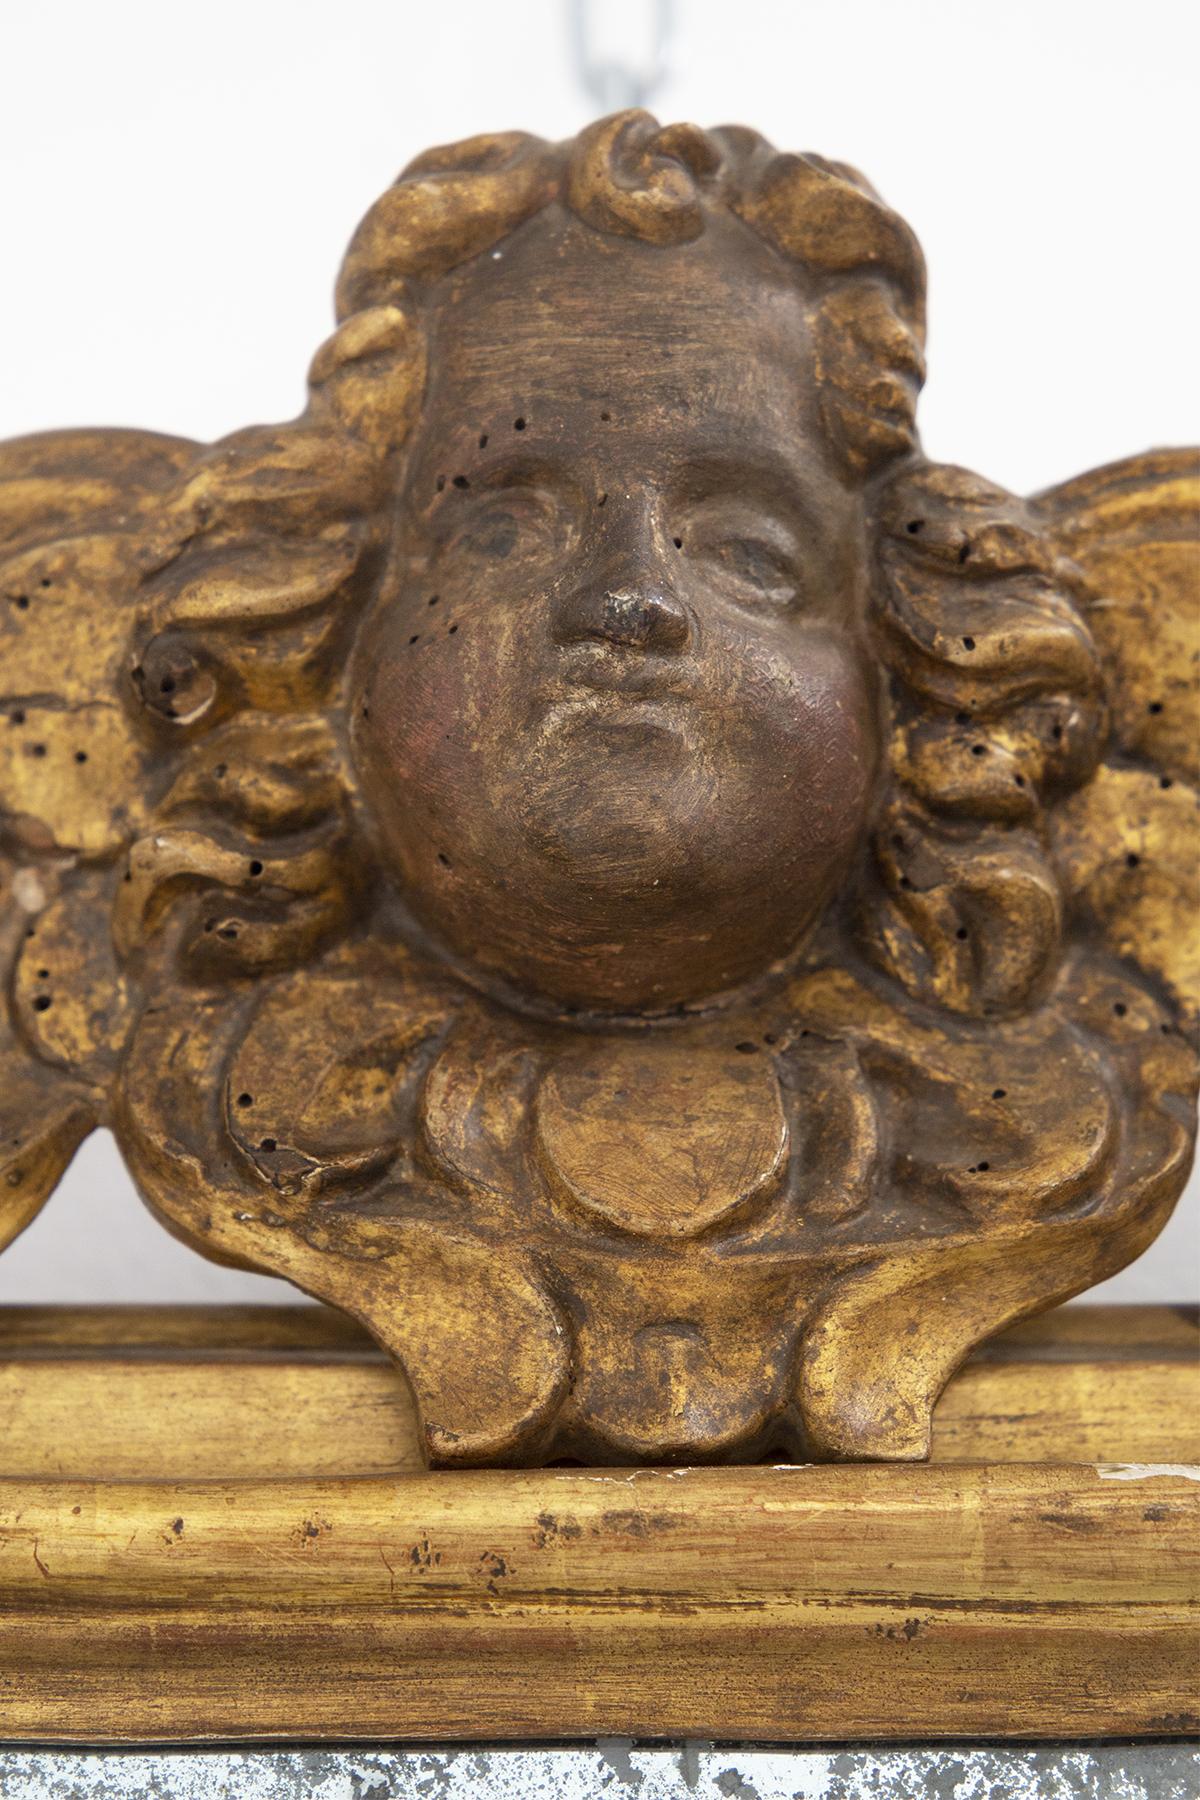 Antique Italian wall mirror made of carved and gilded wood. At the centre of the wooden frame we find carved a putto's face. 17th century. The beauty of this marvellous mirror is also given by the slightly eroded mirror glass due to age and use. The